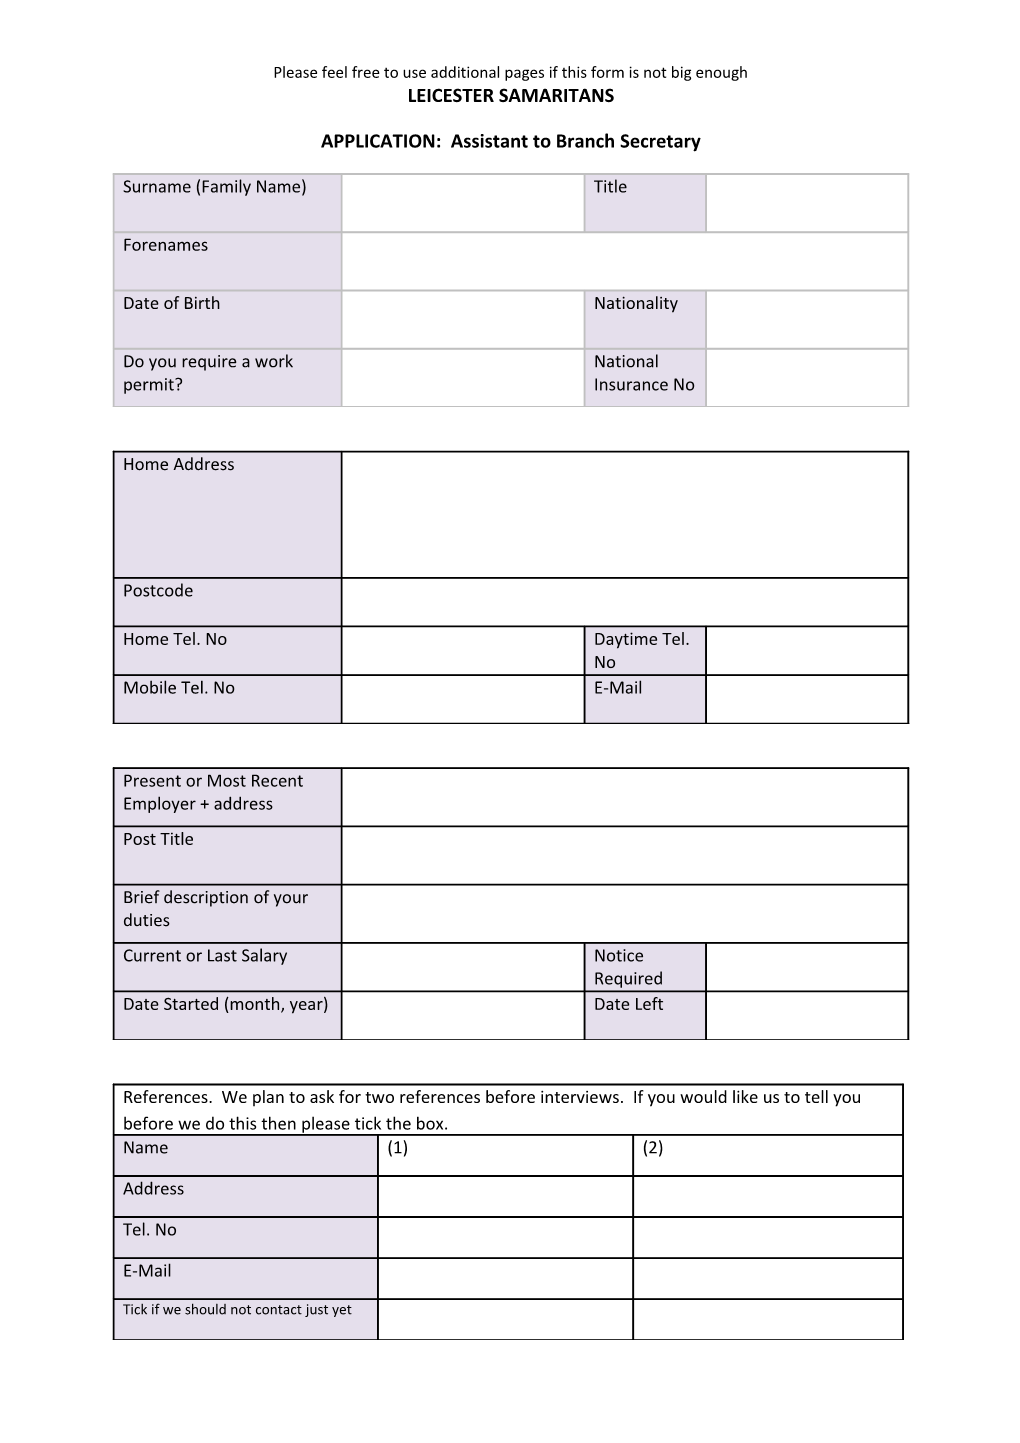 Please Feel Free to Use Additional Pages If This Form Is Not Big Enough